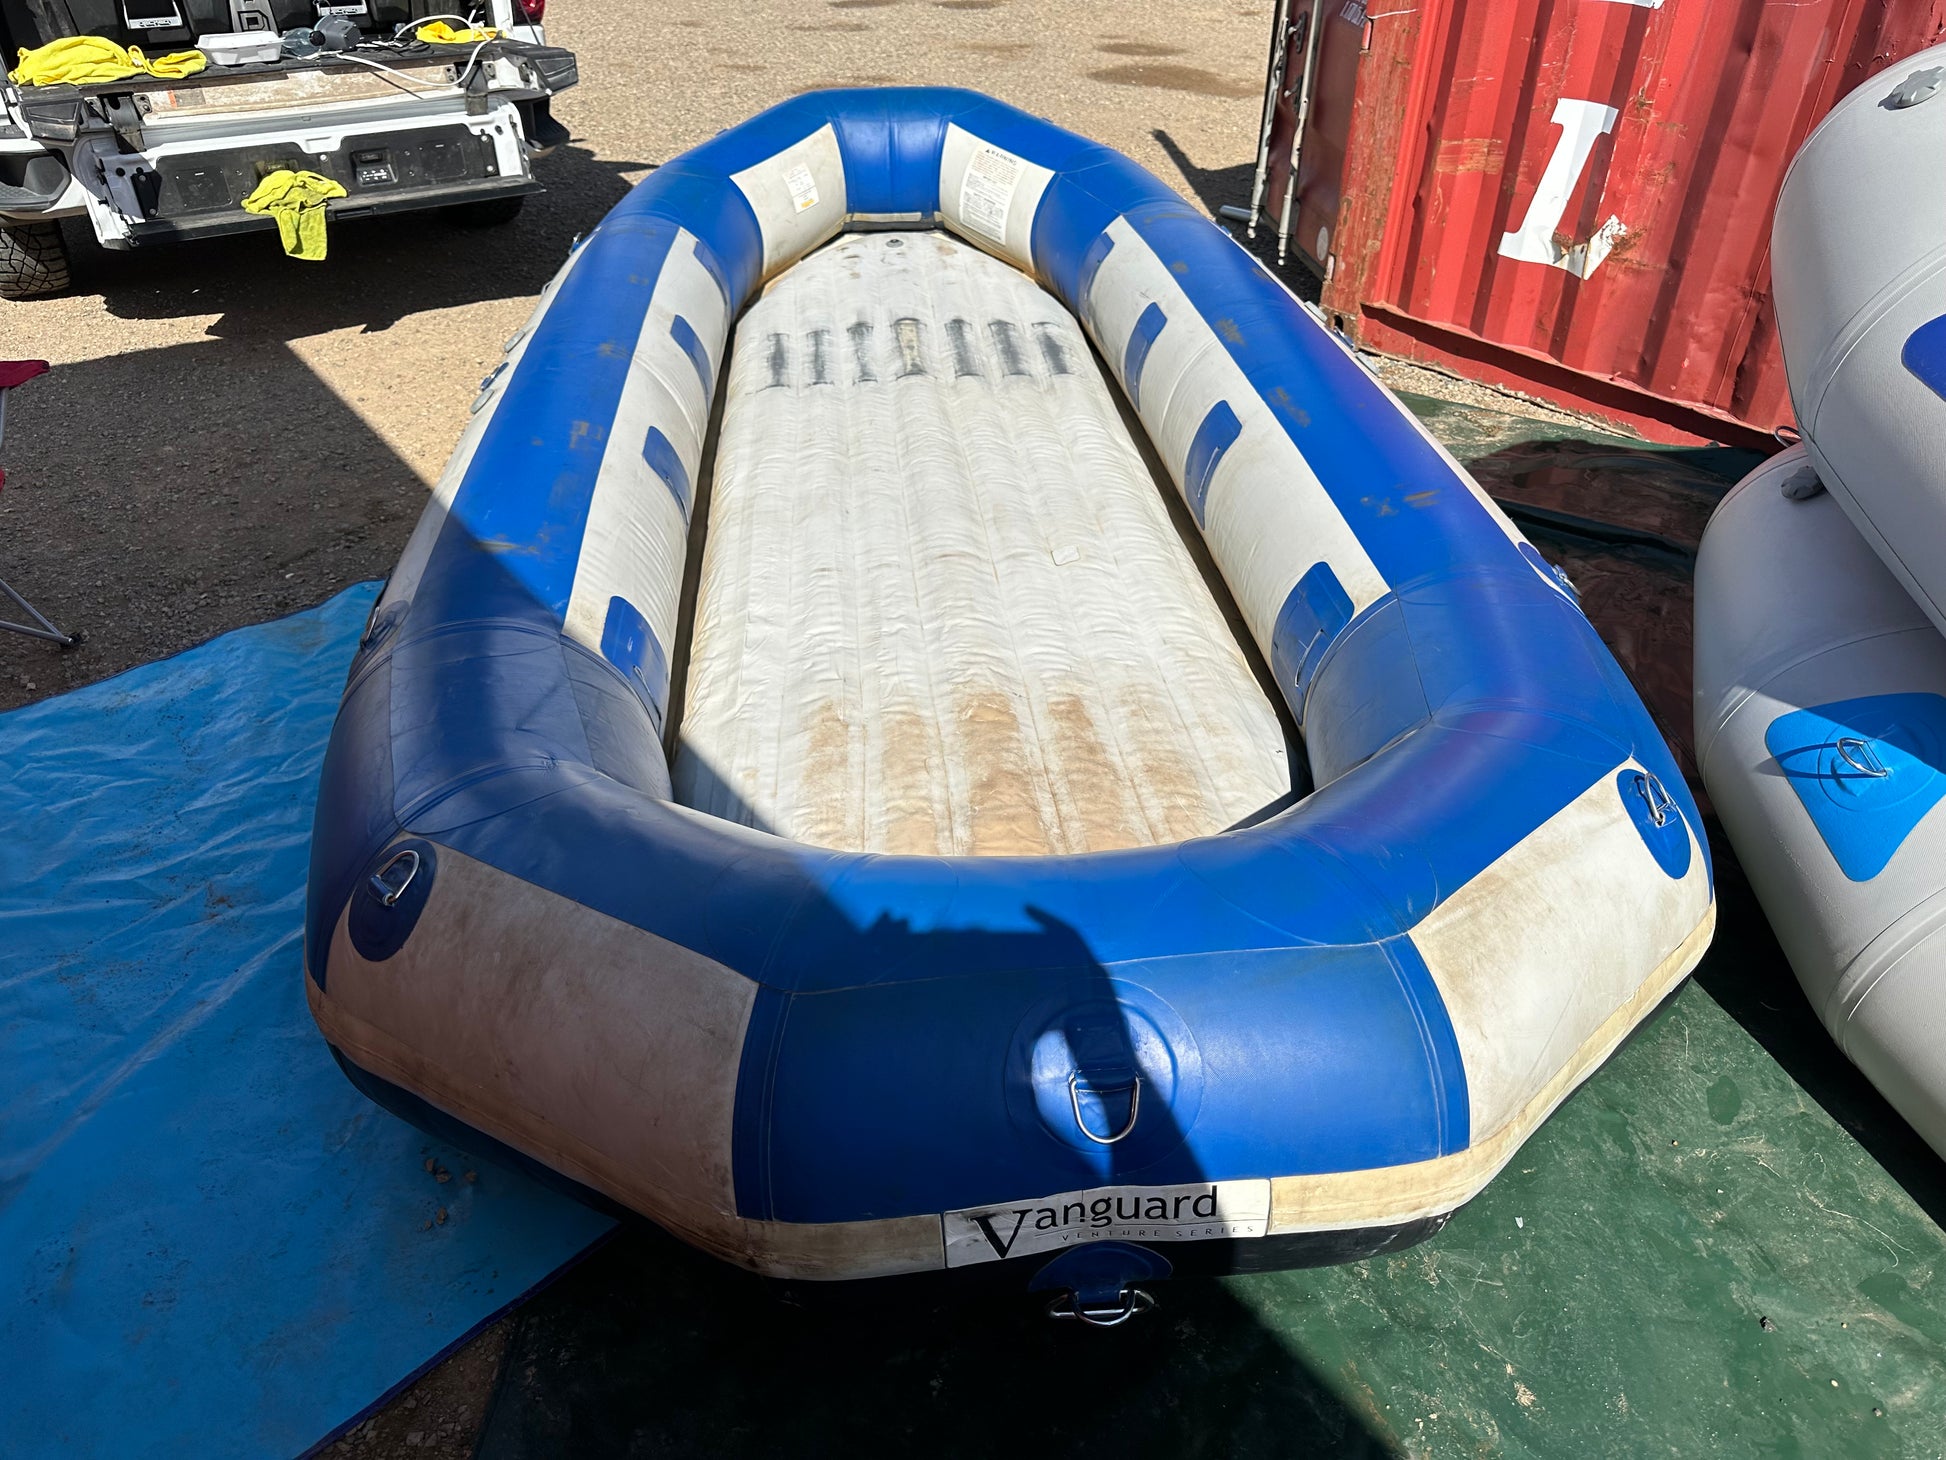 A blue and white 2006 Used 16' Vanguard Raft, sitting on the ground.